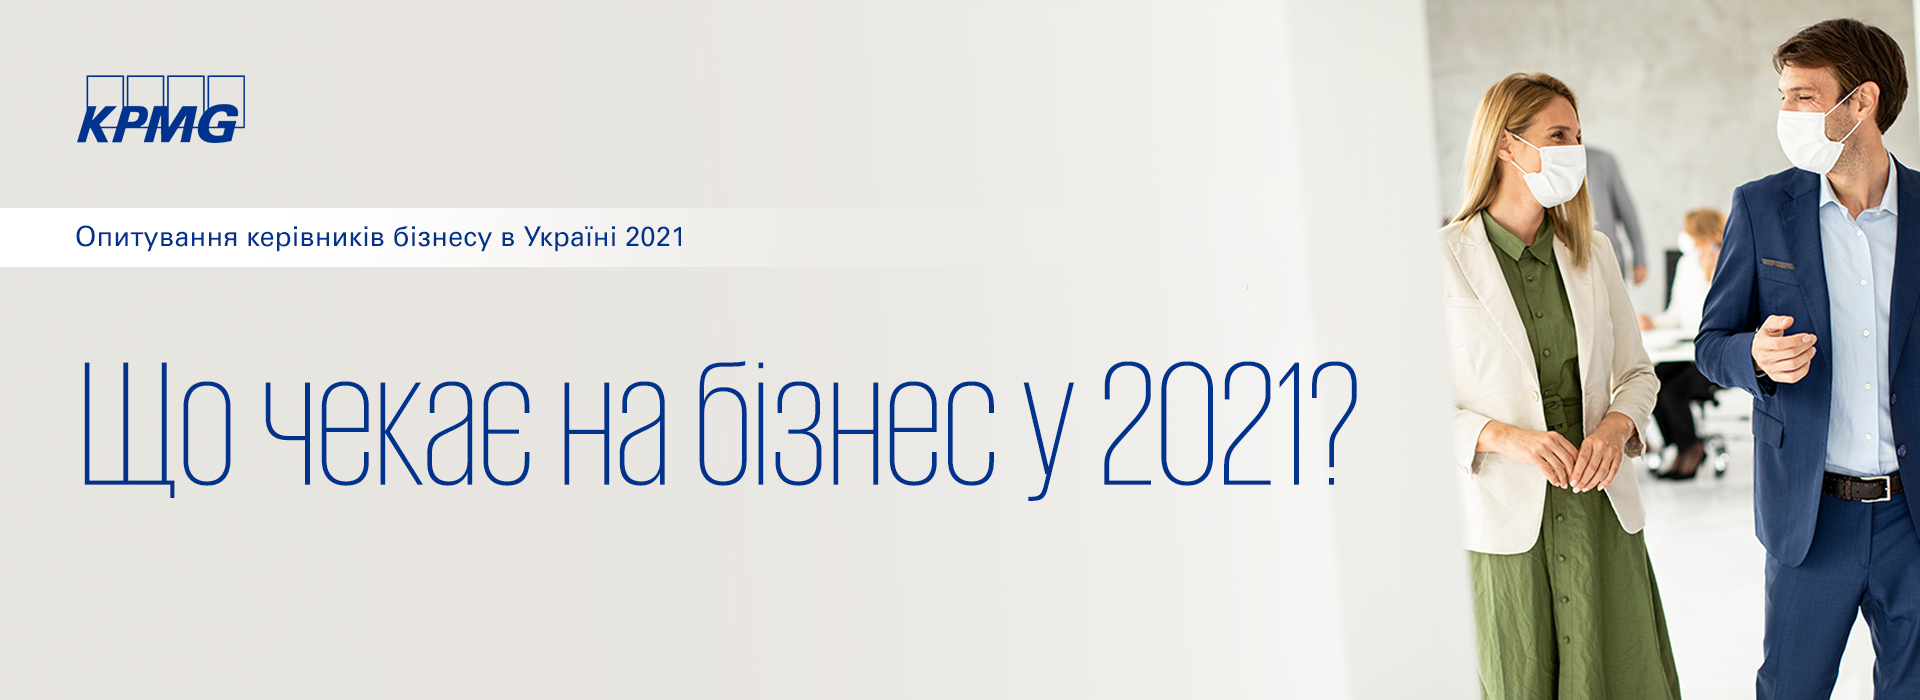 KPMG: Business Leaders in Ukraine 2021 – Take Part in the Survey Today